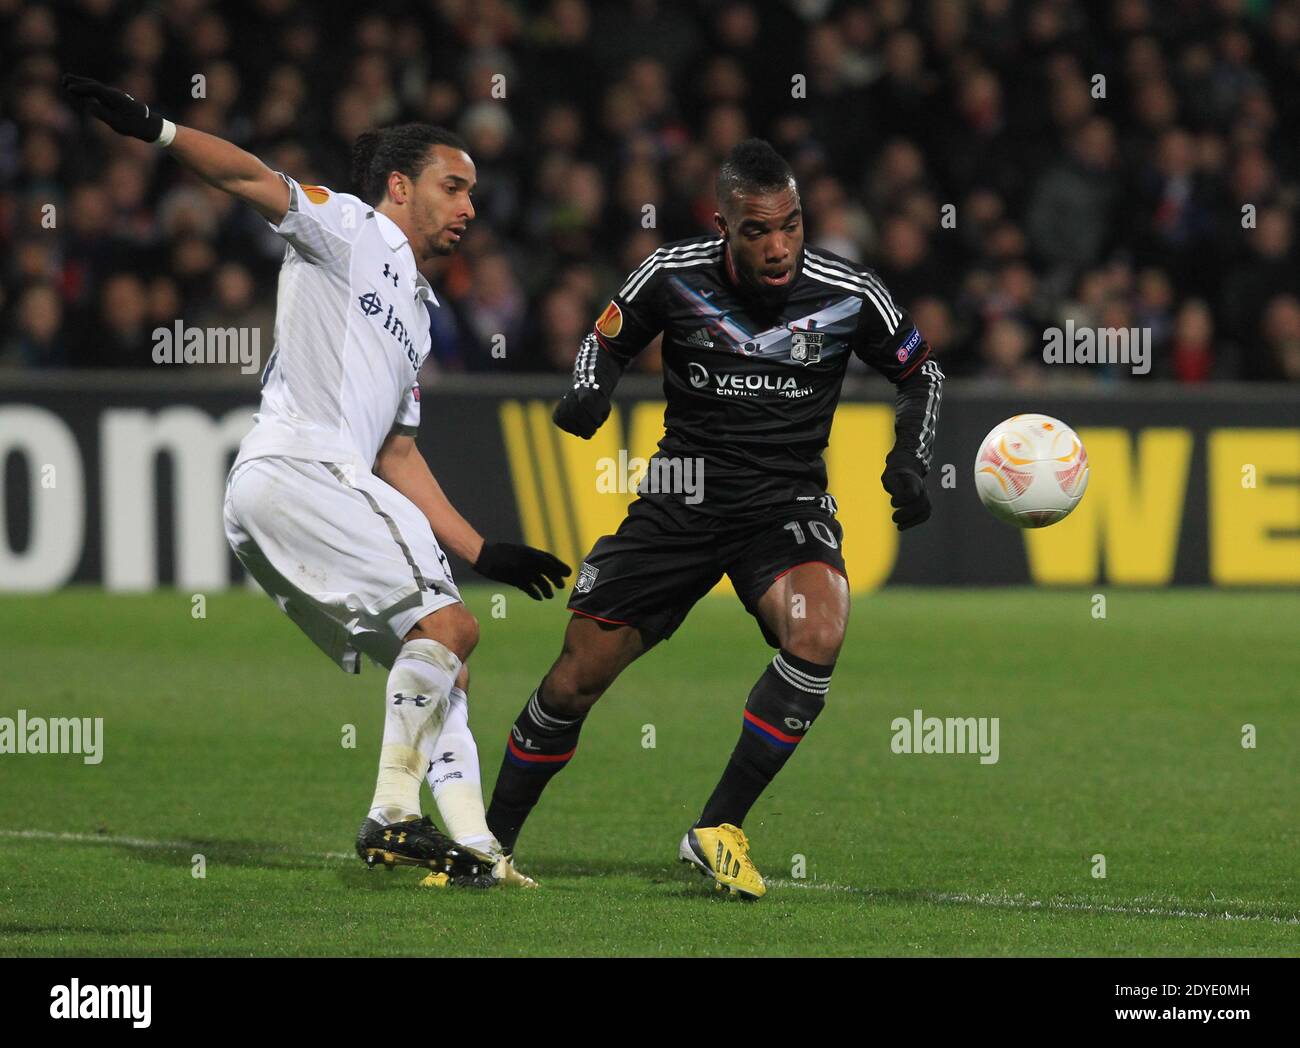 Lyon's Alexandre Lacazette and Tottenham's Benoit Assou-Ekotto during the Europa League soccer match, Olympique Lyonnais Vs Tottenham Hotspur FC at the Gerland stadium in Lyon, France on February 21, 2013. The match ended in a 1-1 draw. Photo by Vincent Dargent/ABACAPRESS.COM Stock Photo